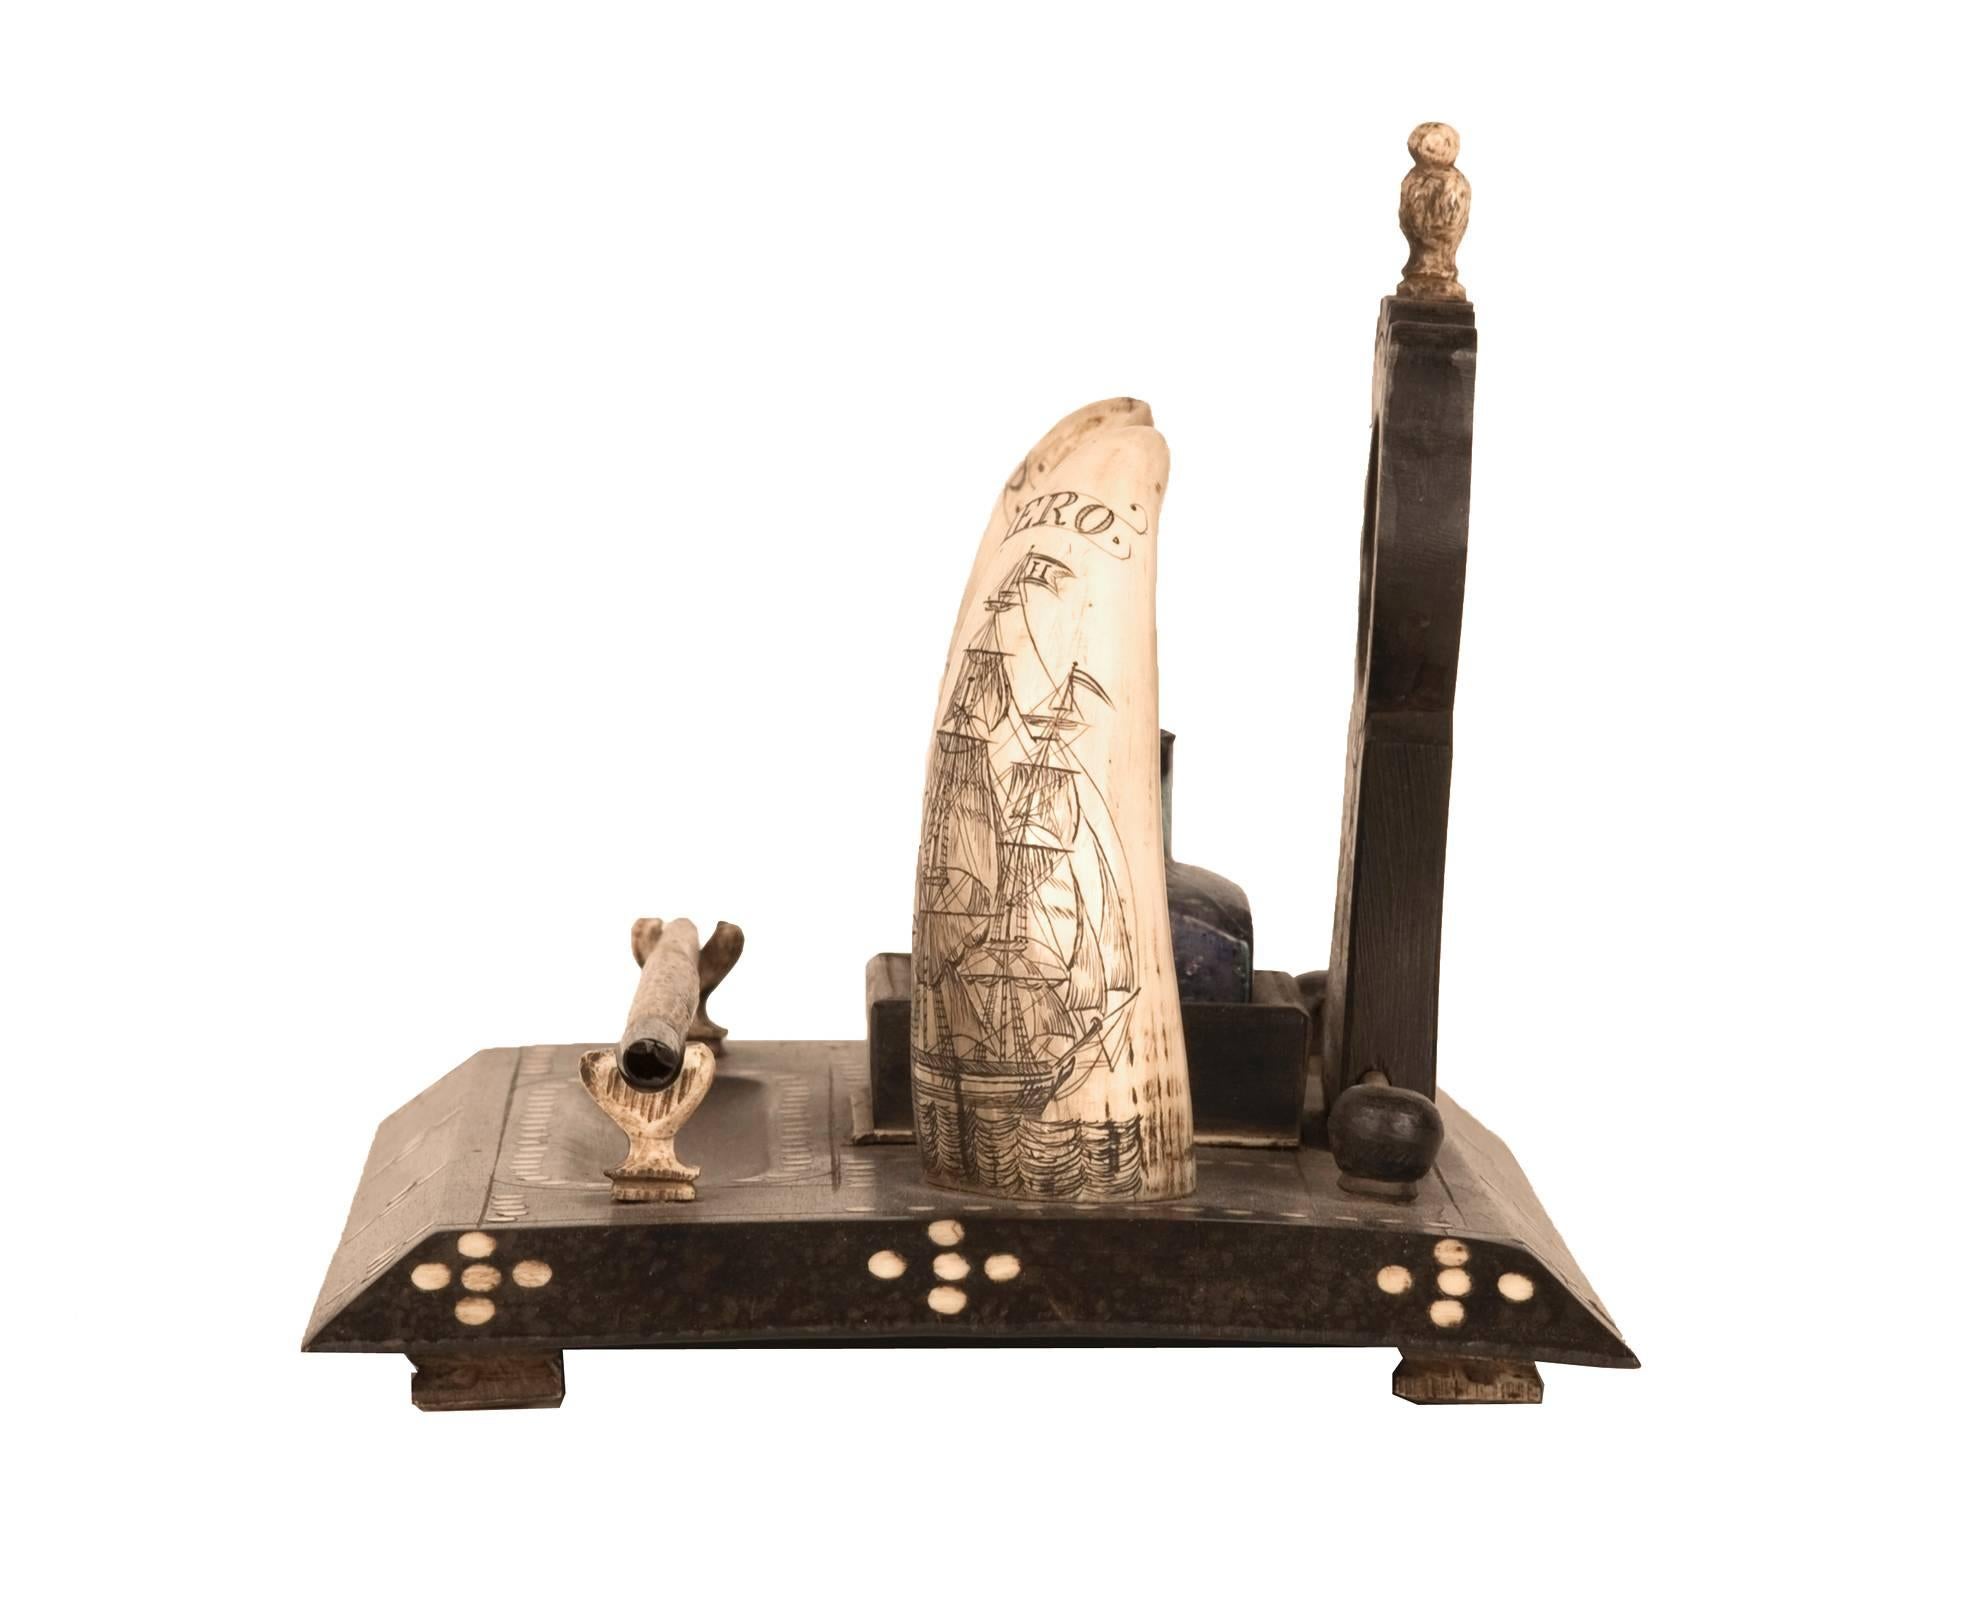 Ebonized baleen pen stand inlaid with a motif of tusk rounds, and scrimshaw whale teeth depicting a commemorative attribution to an American sailor. The teeth are engraved with the words “Ship” and “Hero”, and are accompanied with detailed